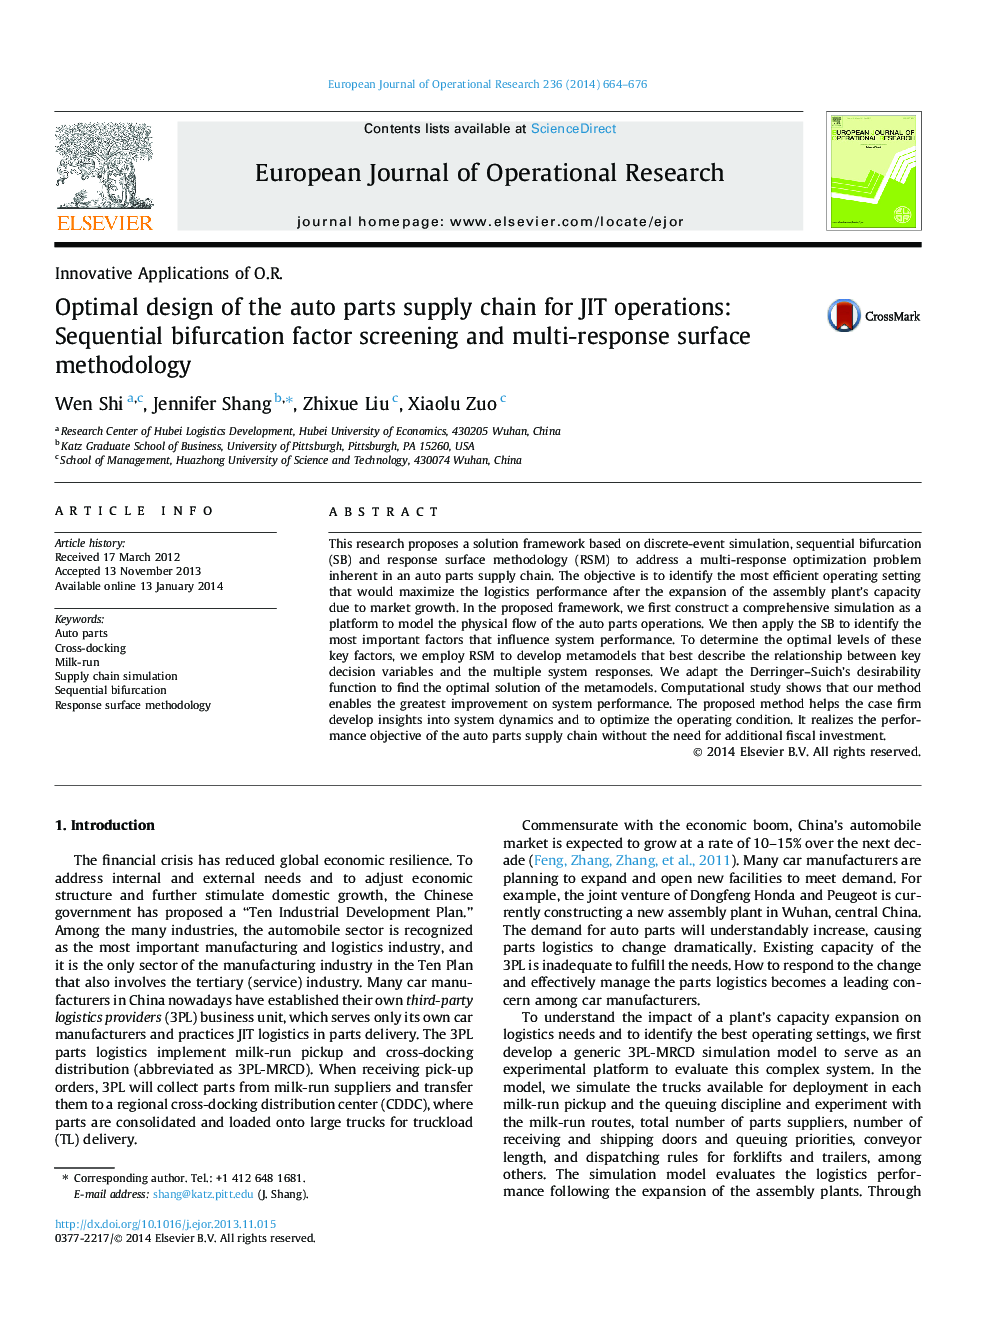 Optimal design of the auto parts supply chain for JIT operations: Sequential bifurcation factor screening and multi-response surface methodology